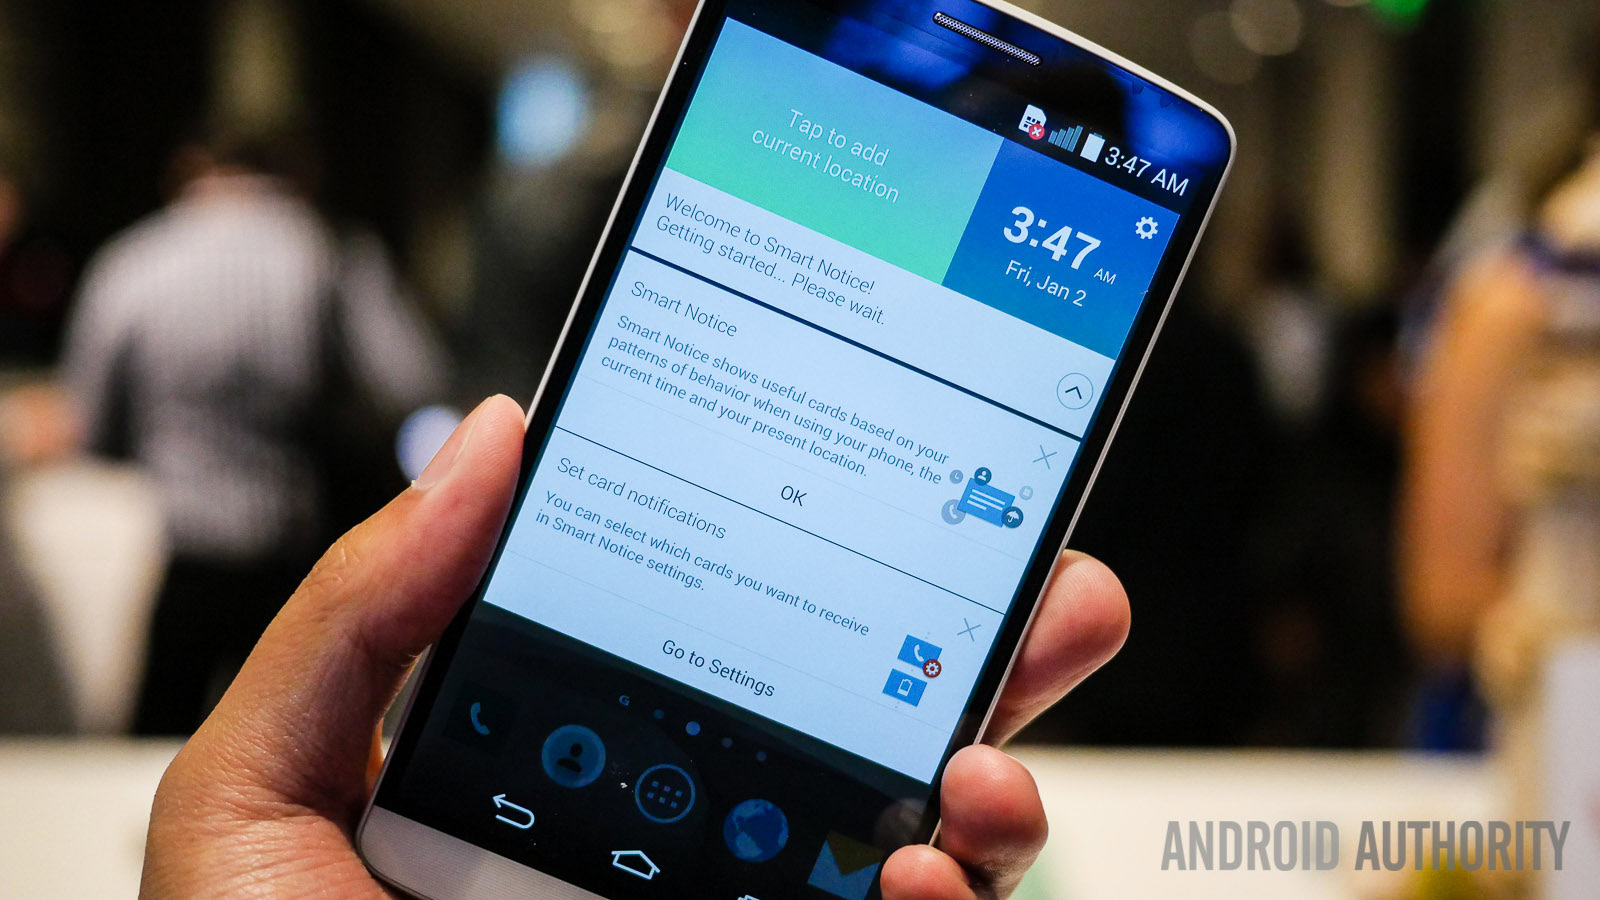 lg g3 hands on (17 of 31)